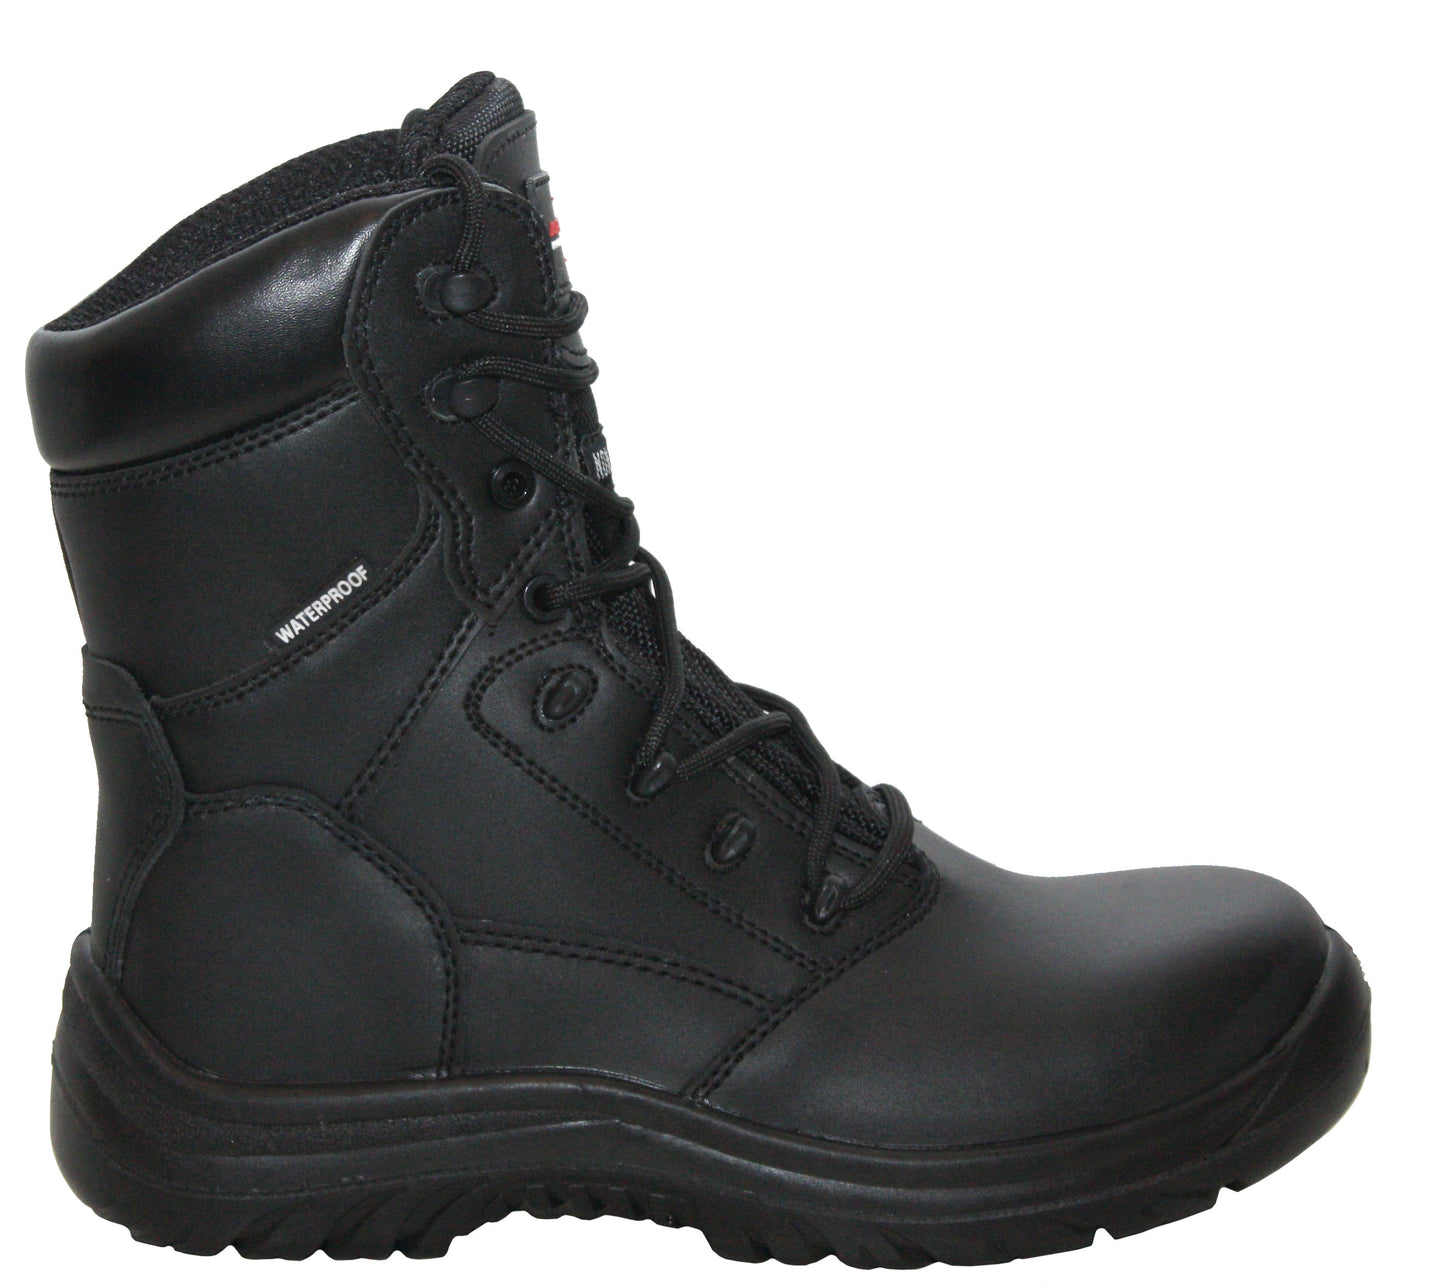 Mens work shoe Waterproof Non-Metal Military Safety Boots in Black